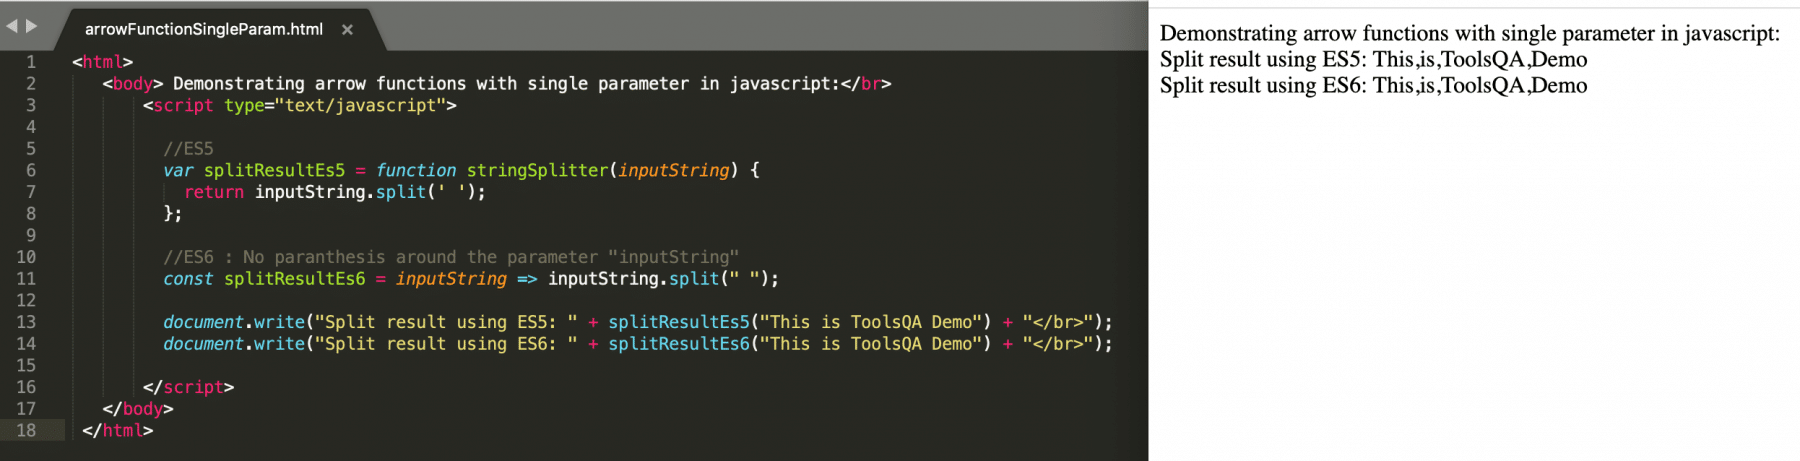 Arrow Function in Javascript with single Parameter